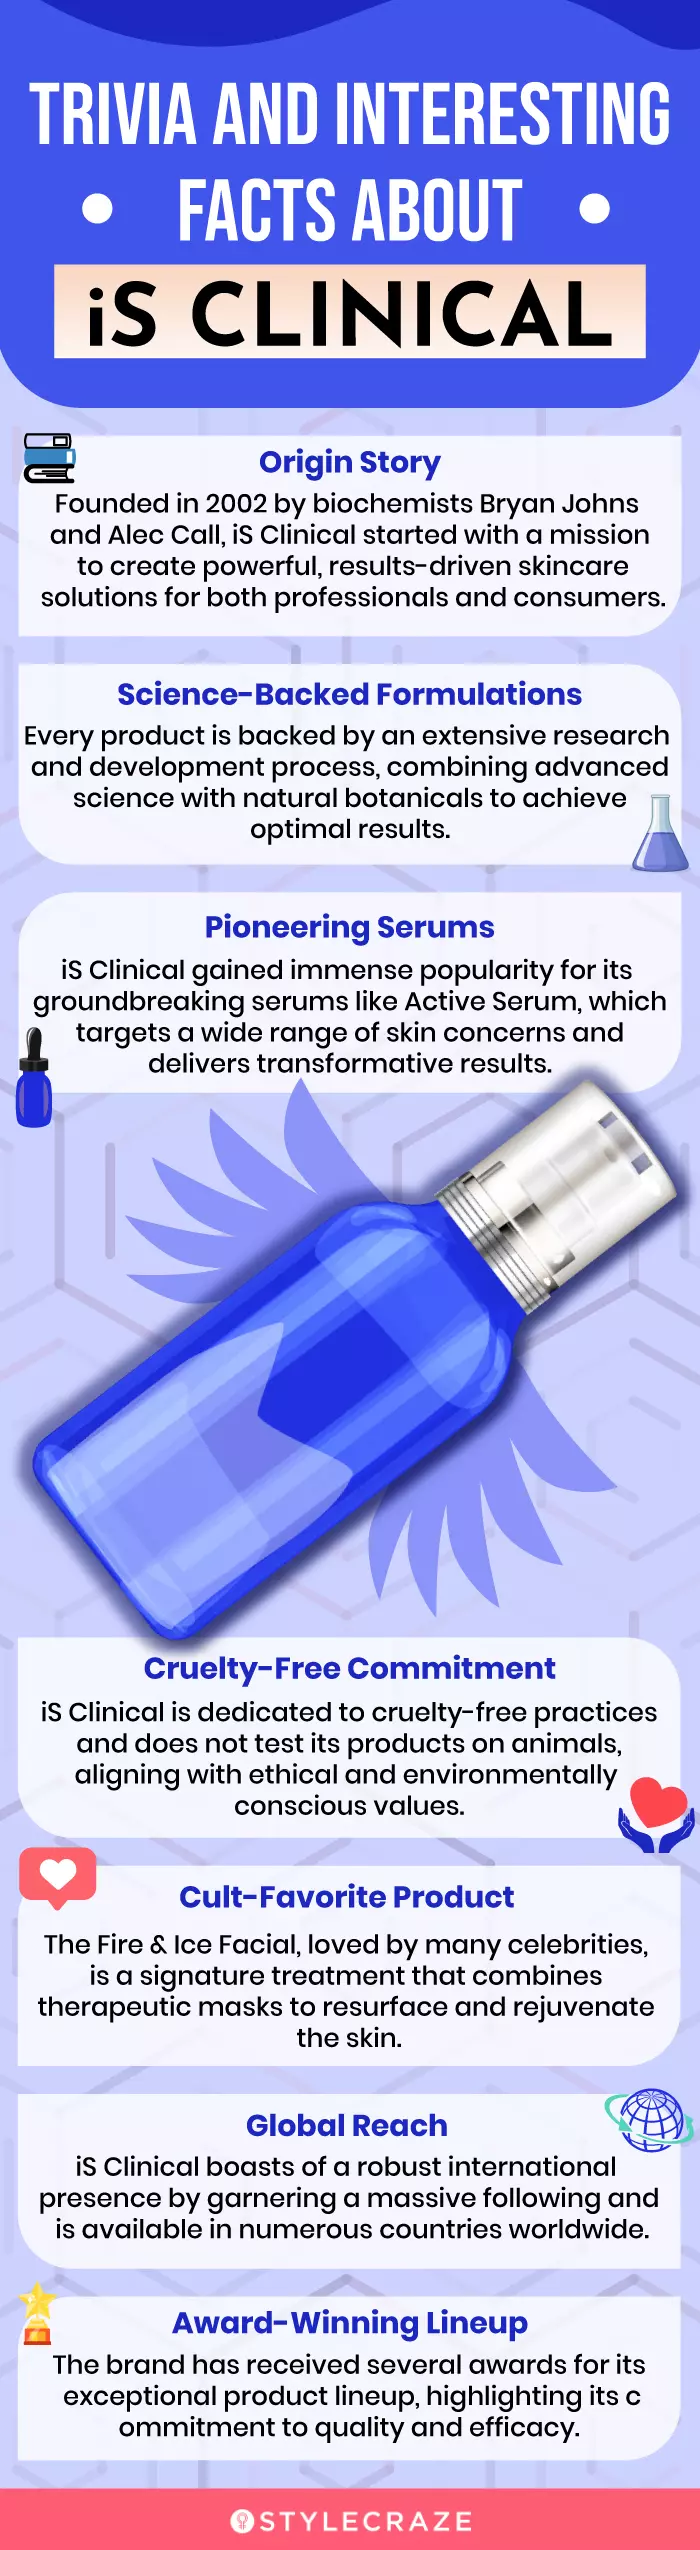 Trivia And Interesting Facts About Is Clinical (infographic)